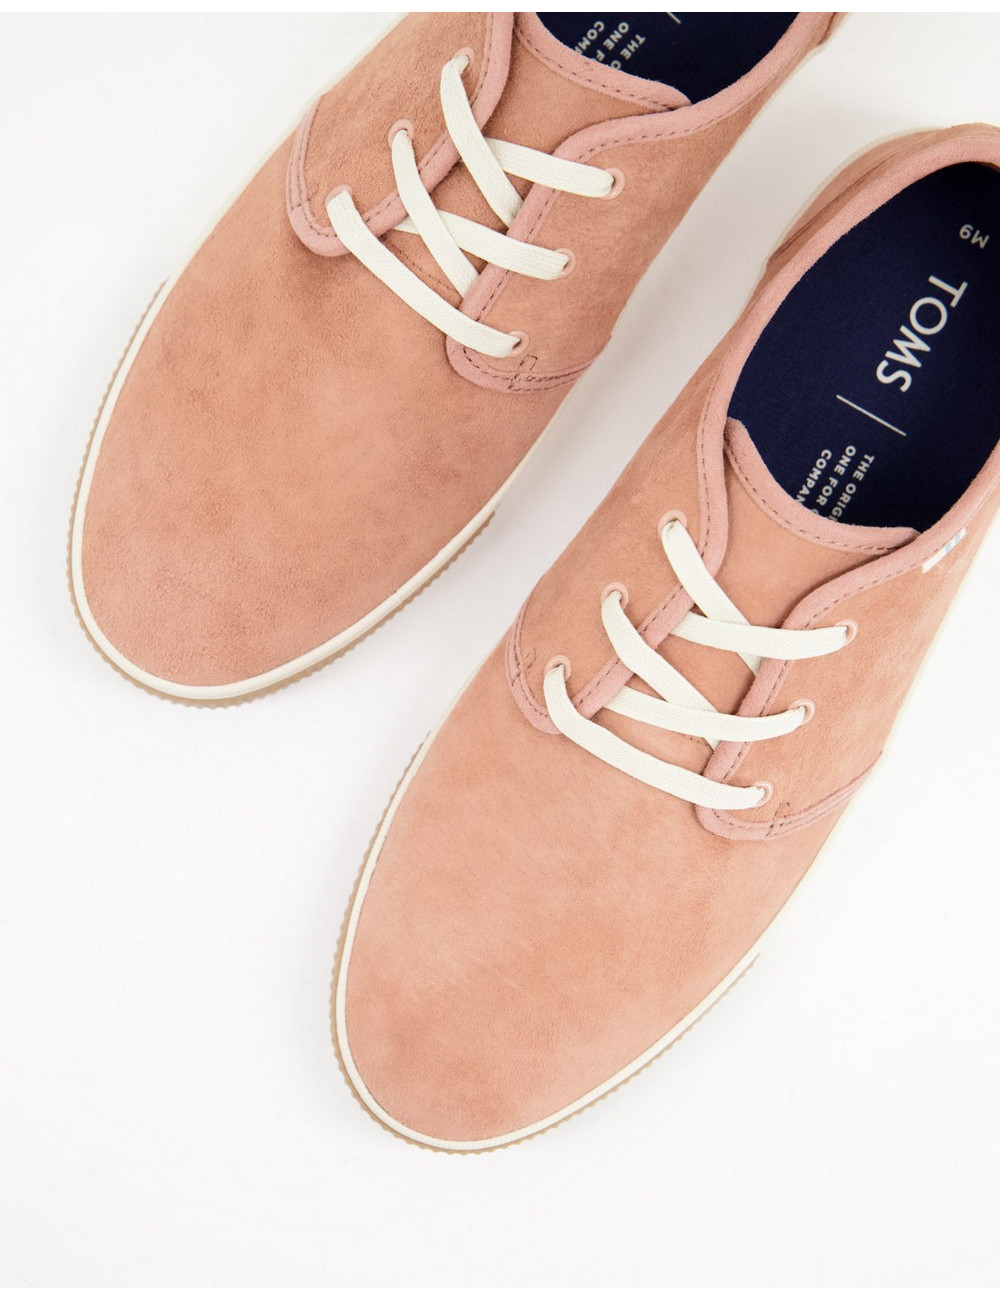 Toms plimsoll trainer in pink